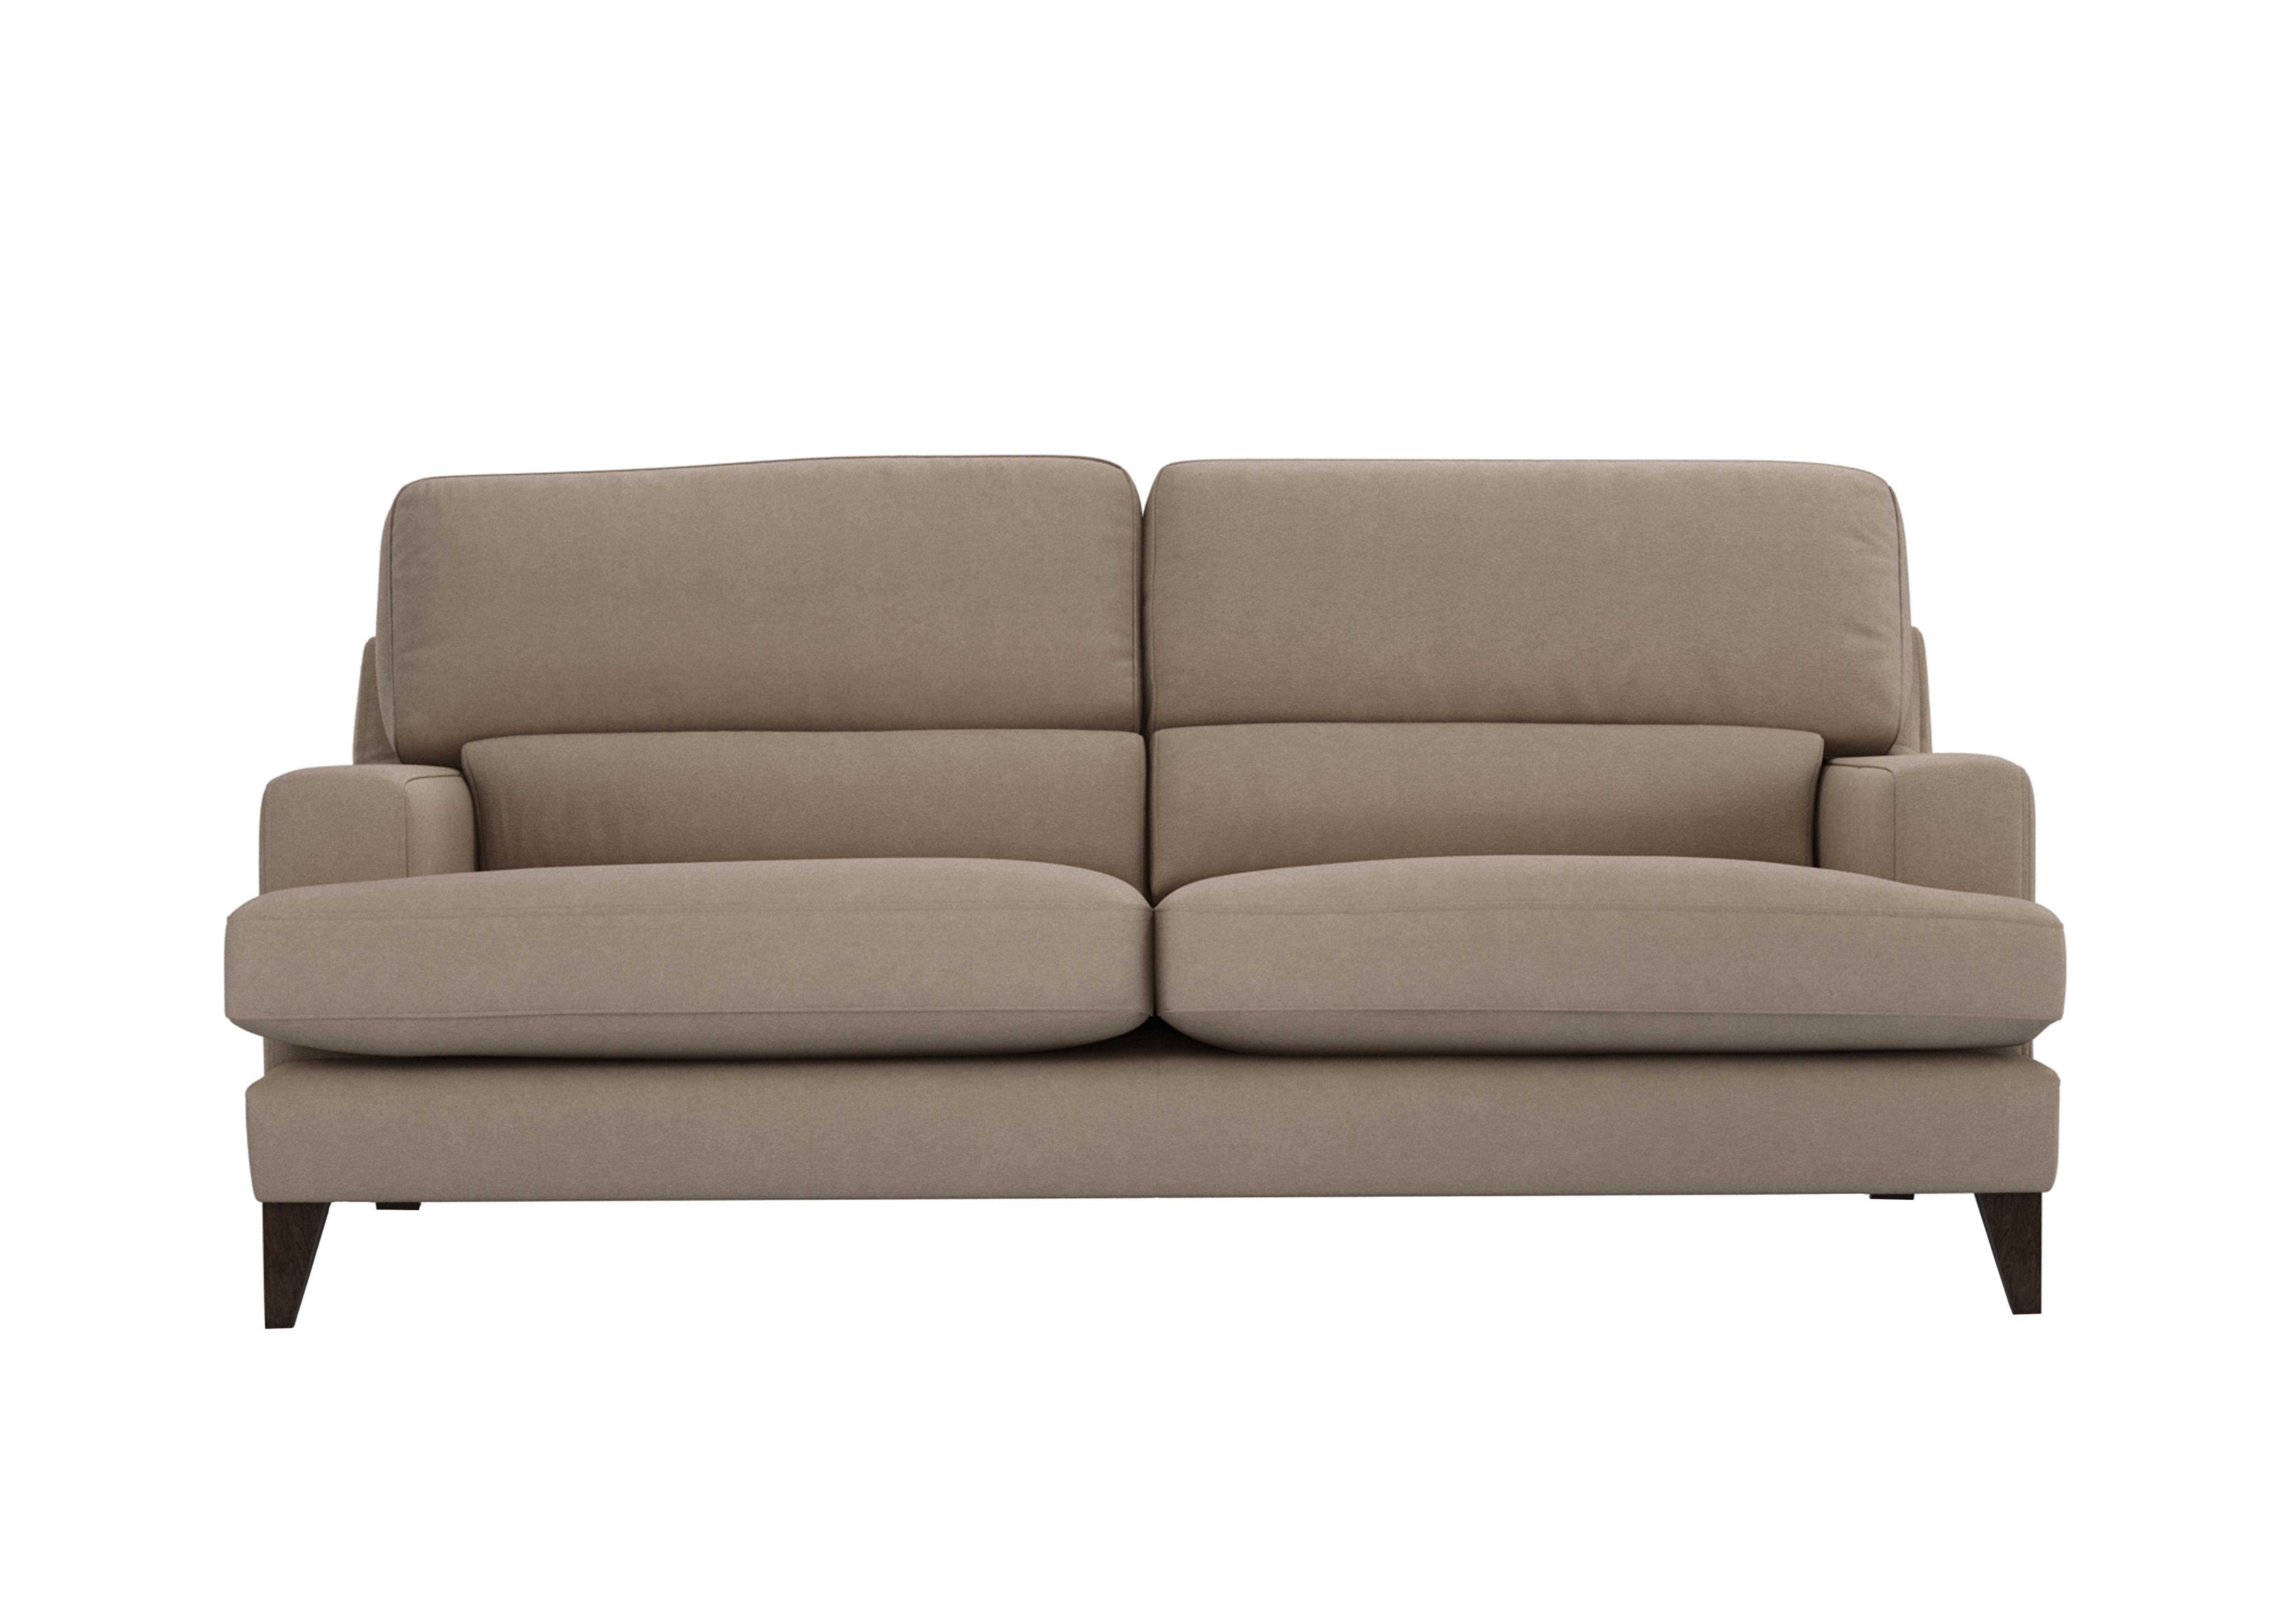 Romilly 3 Seater Fabric Sofa in Bra223 Brandy Butter Wa Ft on Furniture Village